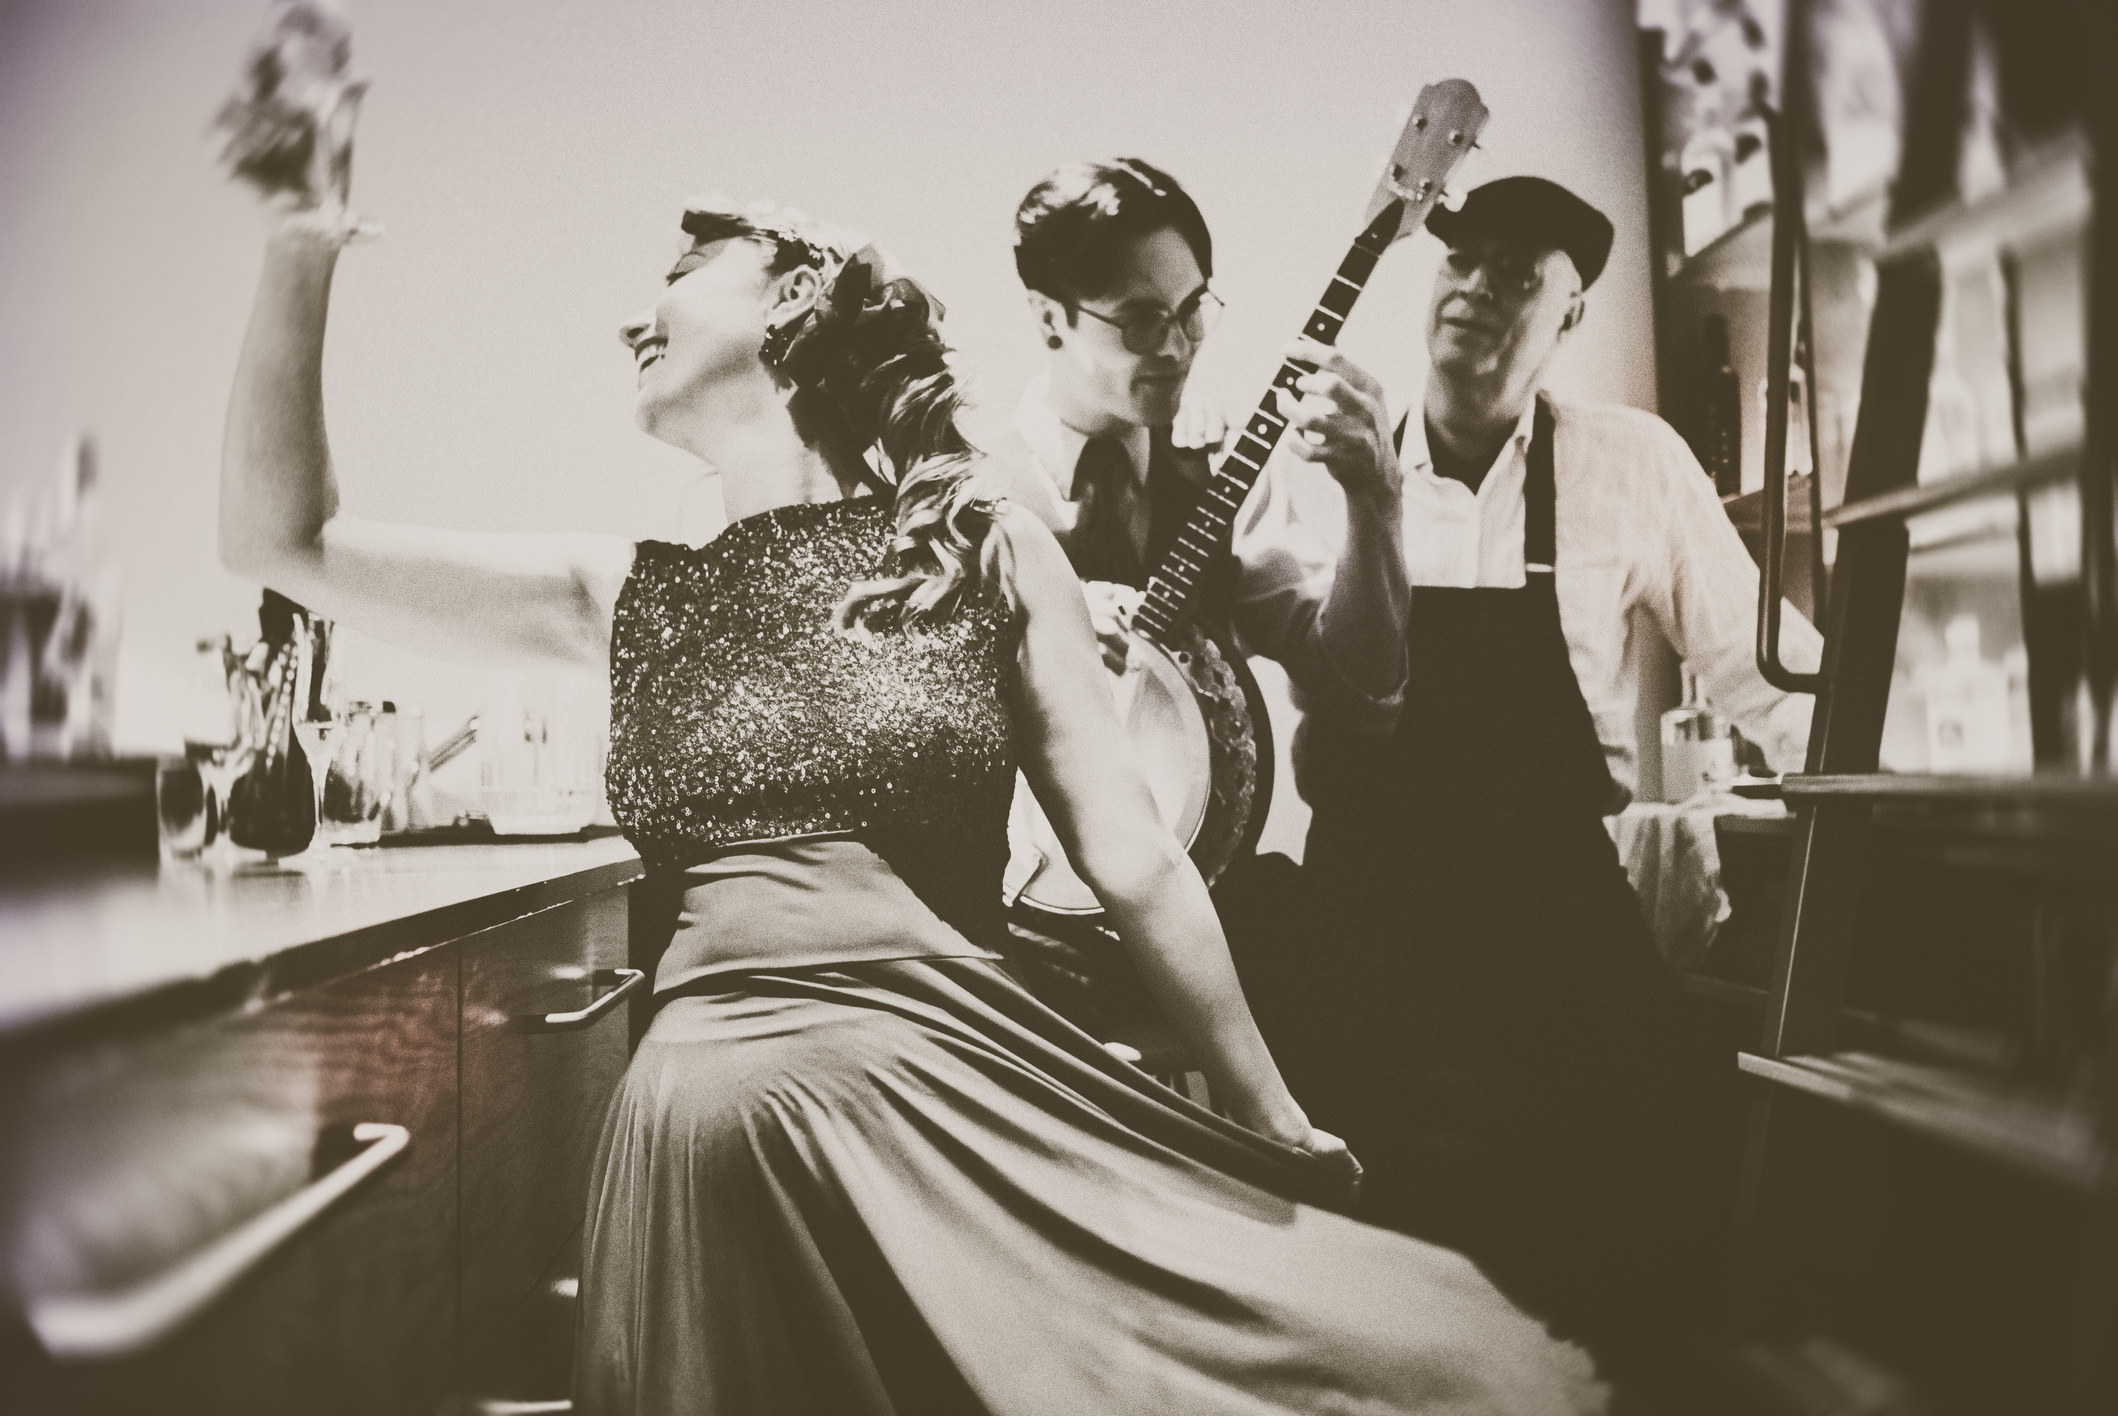 A sepia photo of a woman in party dress holding up a glass to cheers, behind her a man with shiny, parted hair and glasses plays a banjo, and just behind him stands another man in overalls and a cap